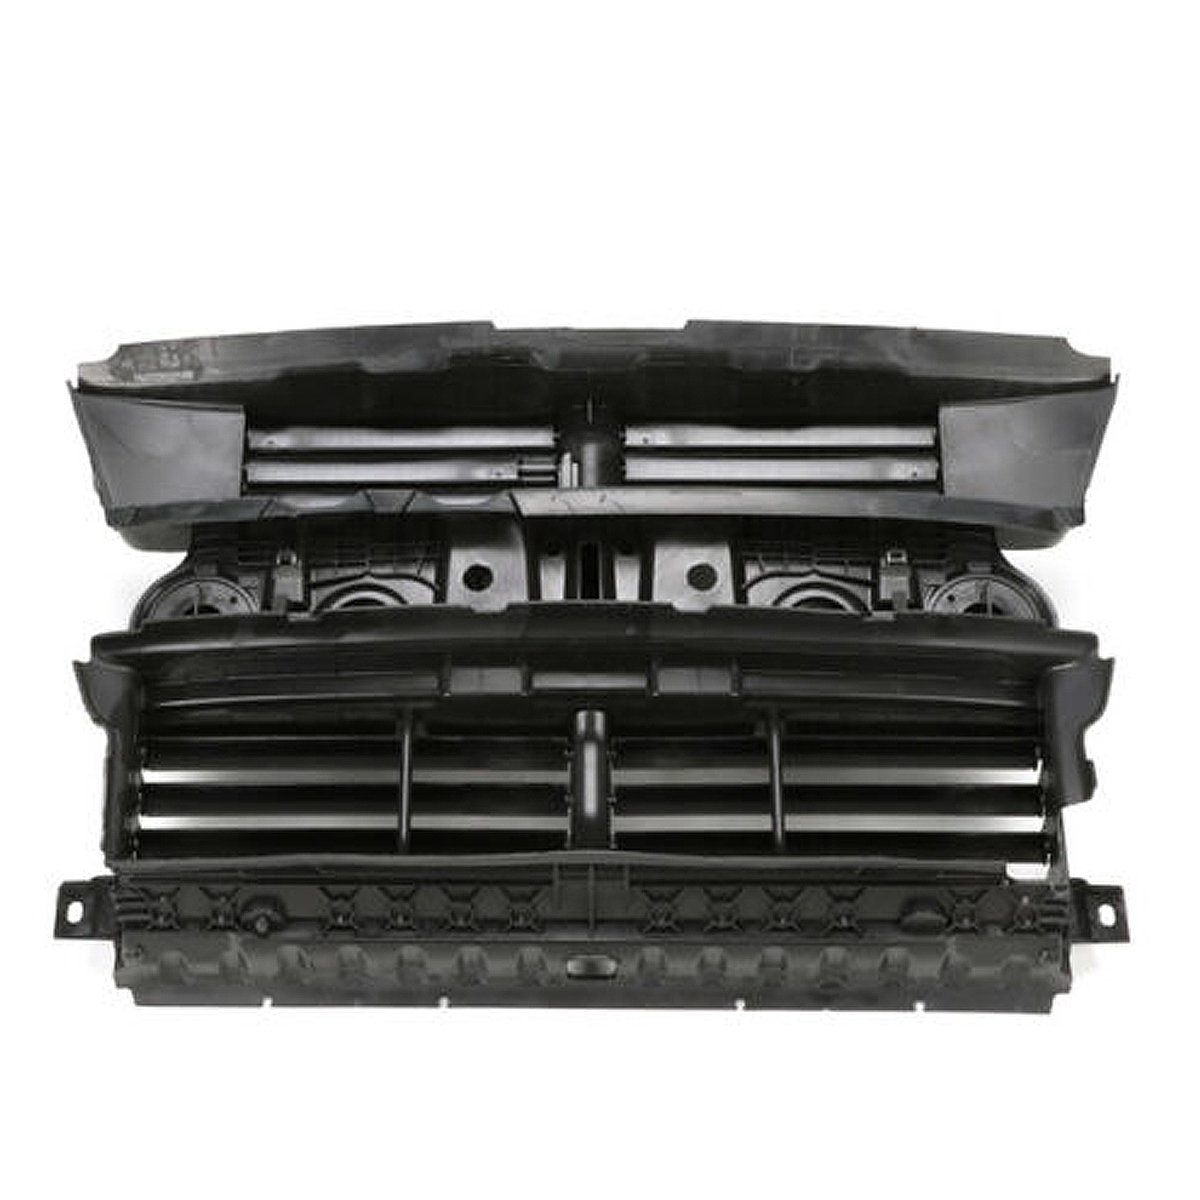 

Radiator Grille Grill Control Shutter without Adaptive Cruise For Ford Escape 17-20 GV4Z8475A